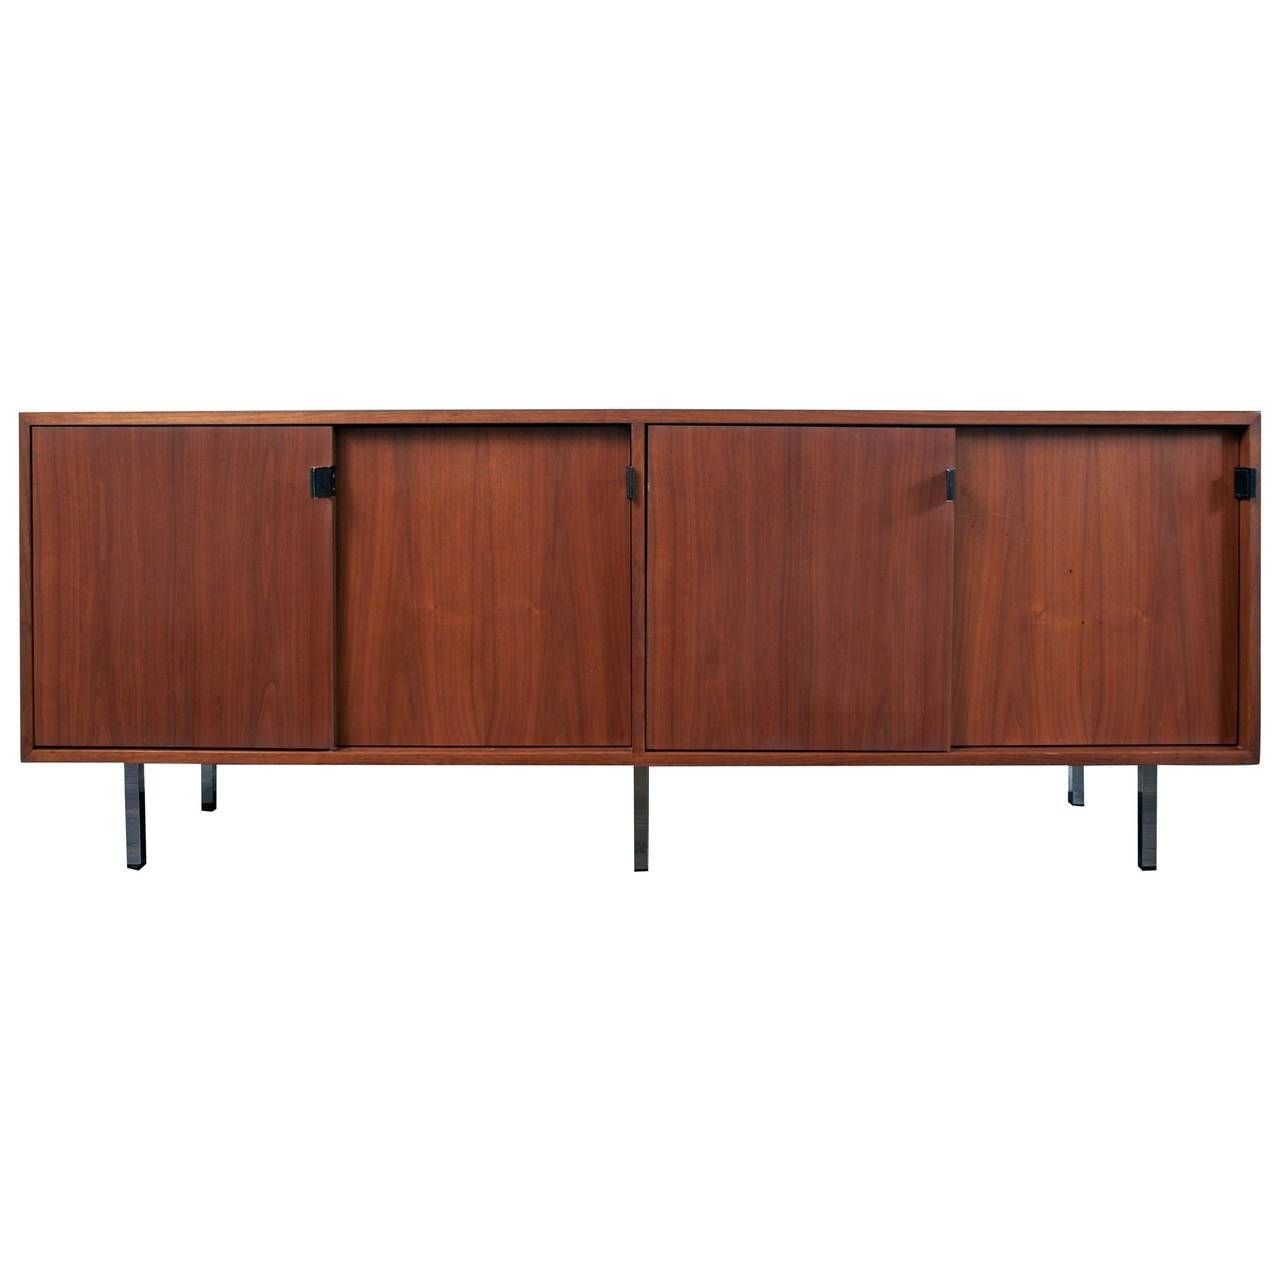 Florence Knoll Credenza Walnut Sideboard For Sale At 1stdibs Pertaining To Most Recent Florence Knoll Sideboards (Photo 7 of 15)